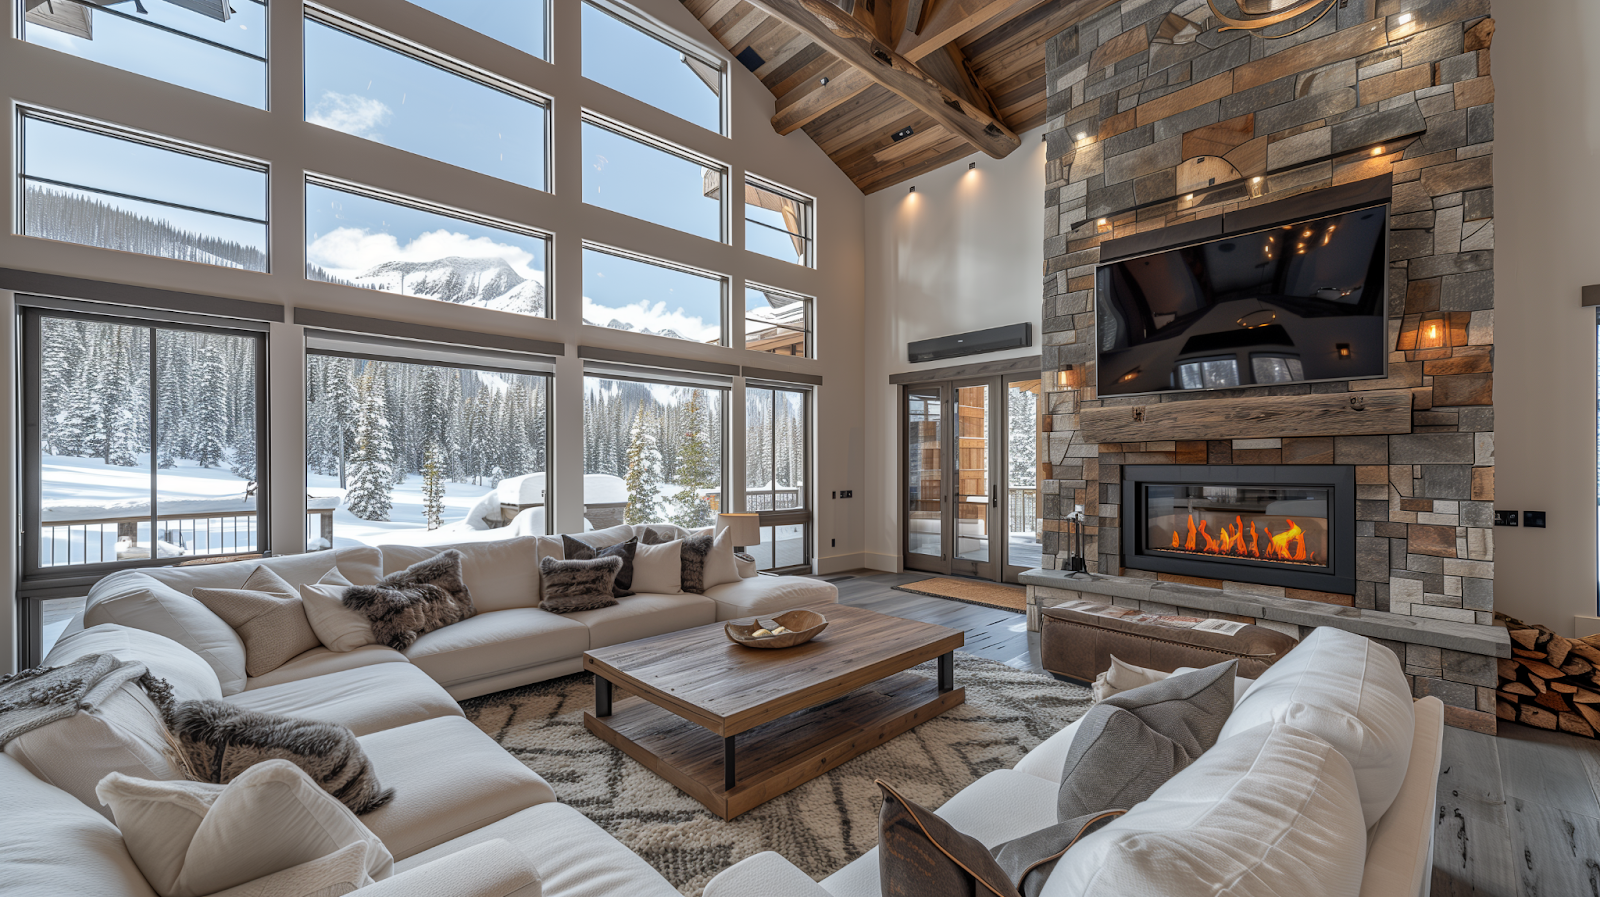 A cozy retreat in the mountains during the winter